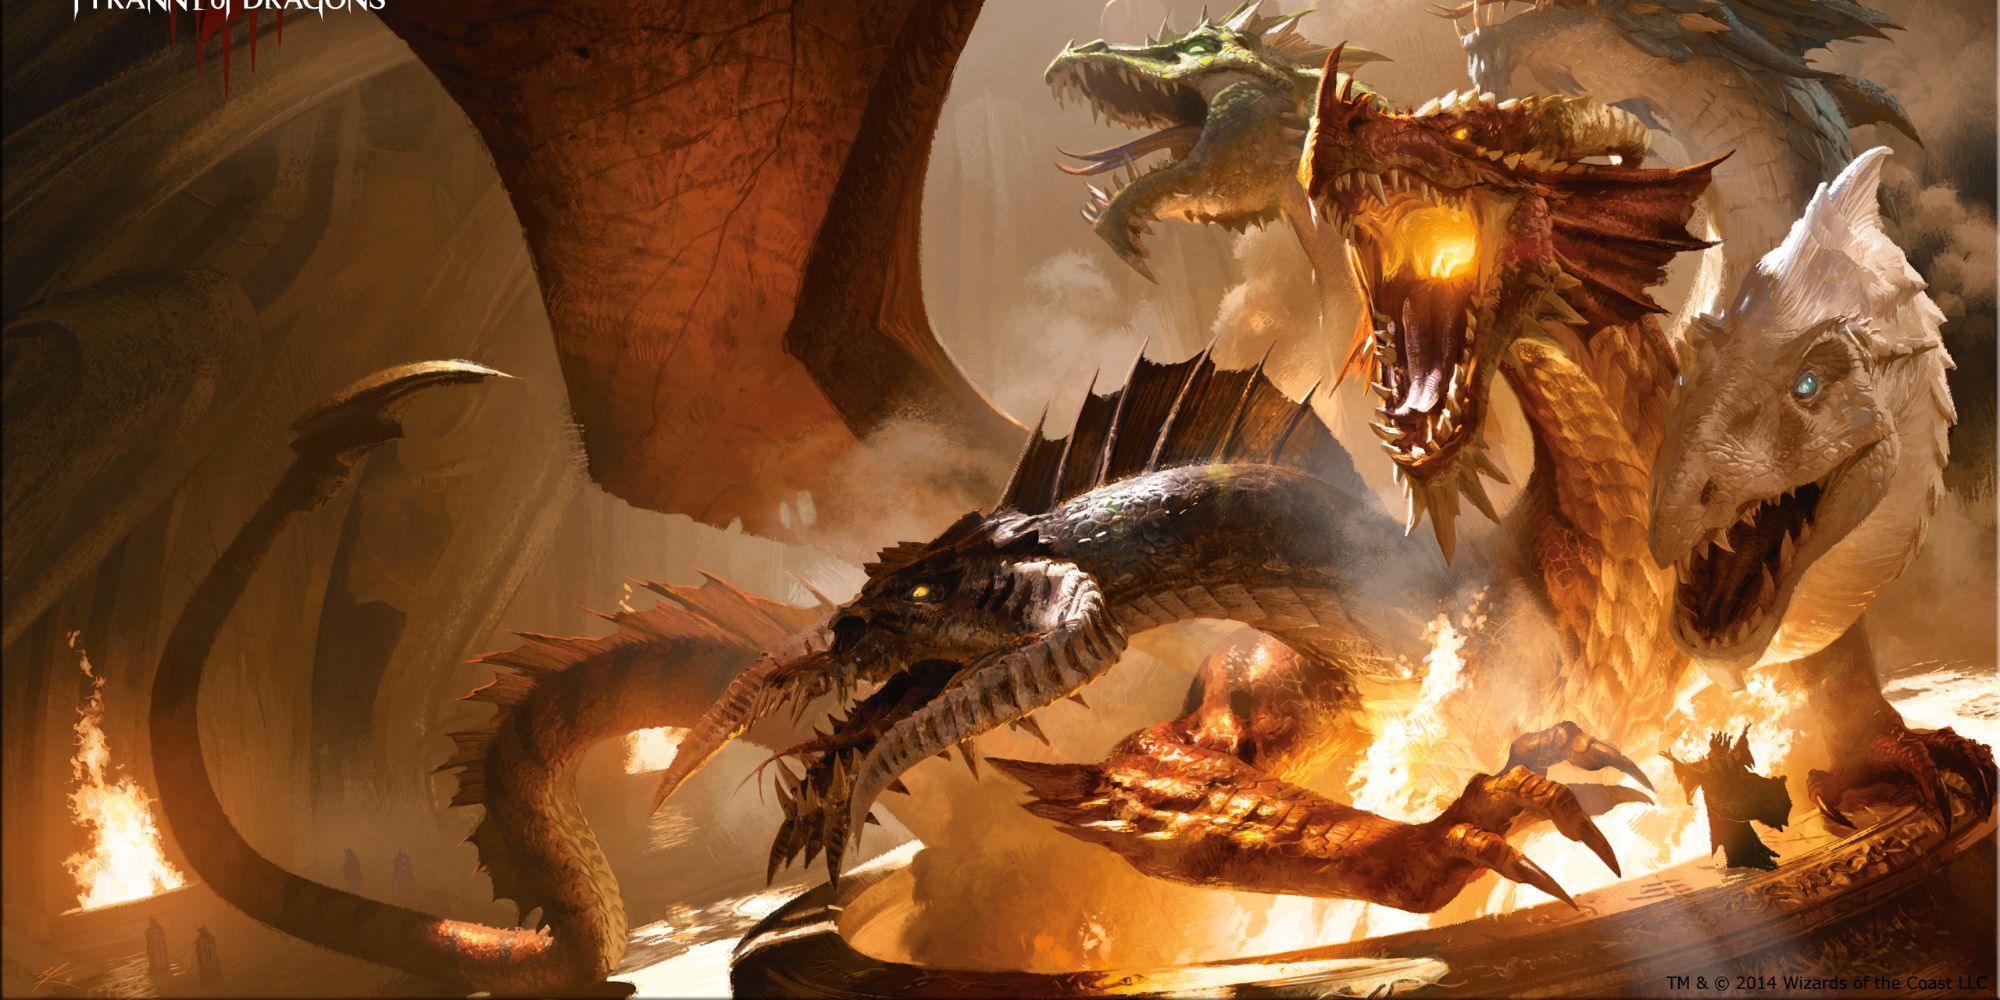 D&D Tiamat Awakening and about to breathe some fire while a wizard stands on the ground in front